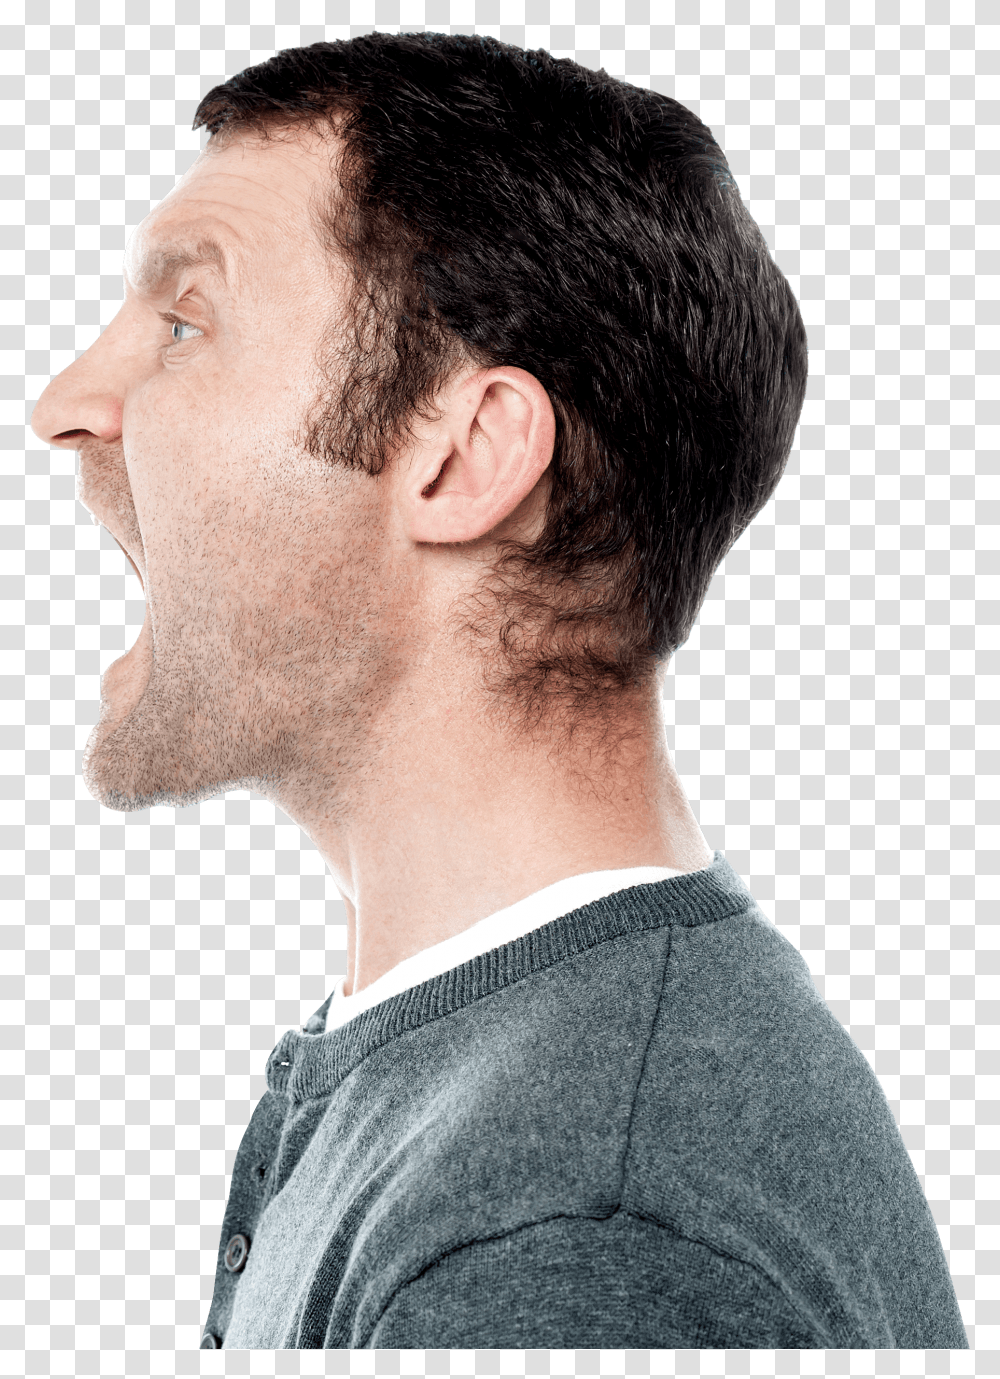 Kisspng Stock Photography Screaming Royalty Free Screaming Screaming Person Side View, Neck, Hair, Human, Head Transparent Png